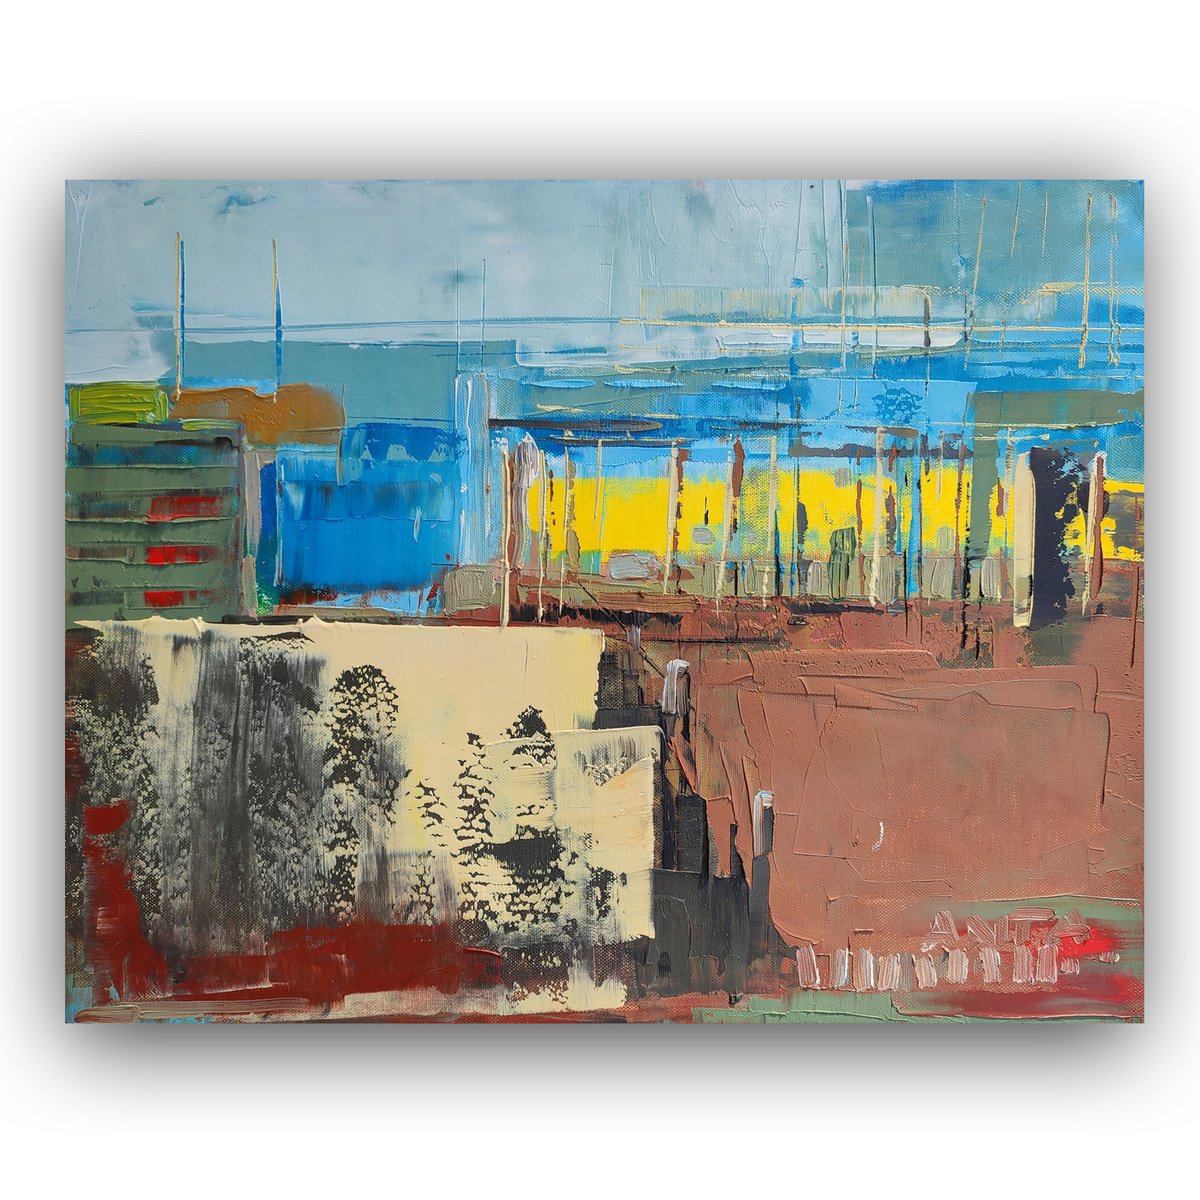 Abstract oil painting City lines 2. Size 15,7/19,7 inches, 40/50cm, stretched by Kariko ono